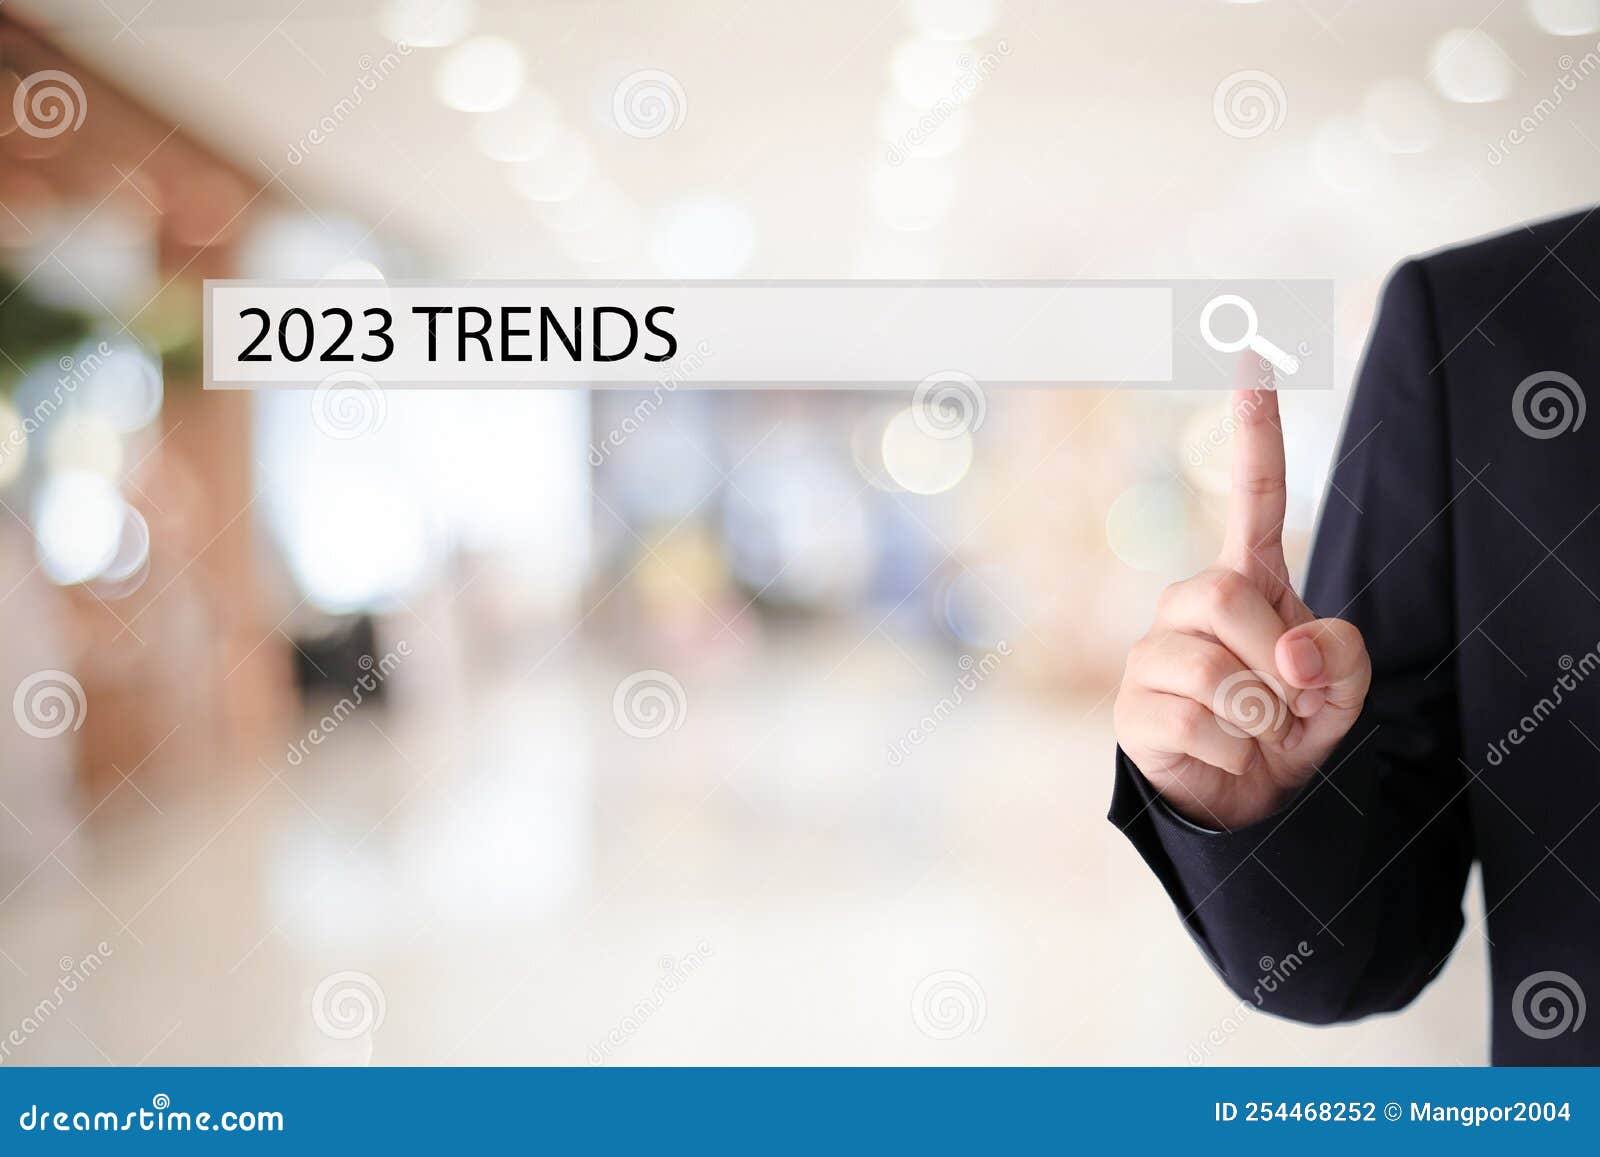 businesman hand touching 2023 trends search bar over blur office background, banner, seo 2023 business trends planning, success in